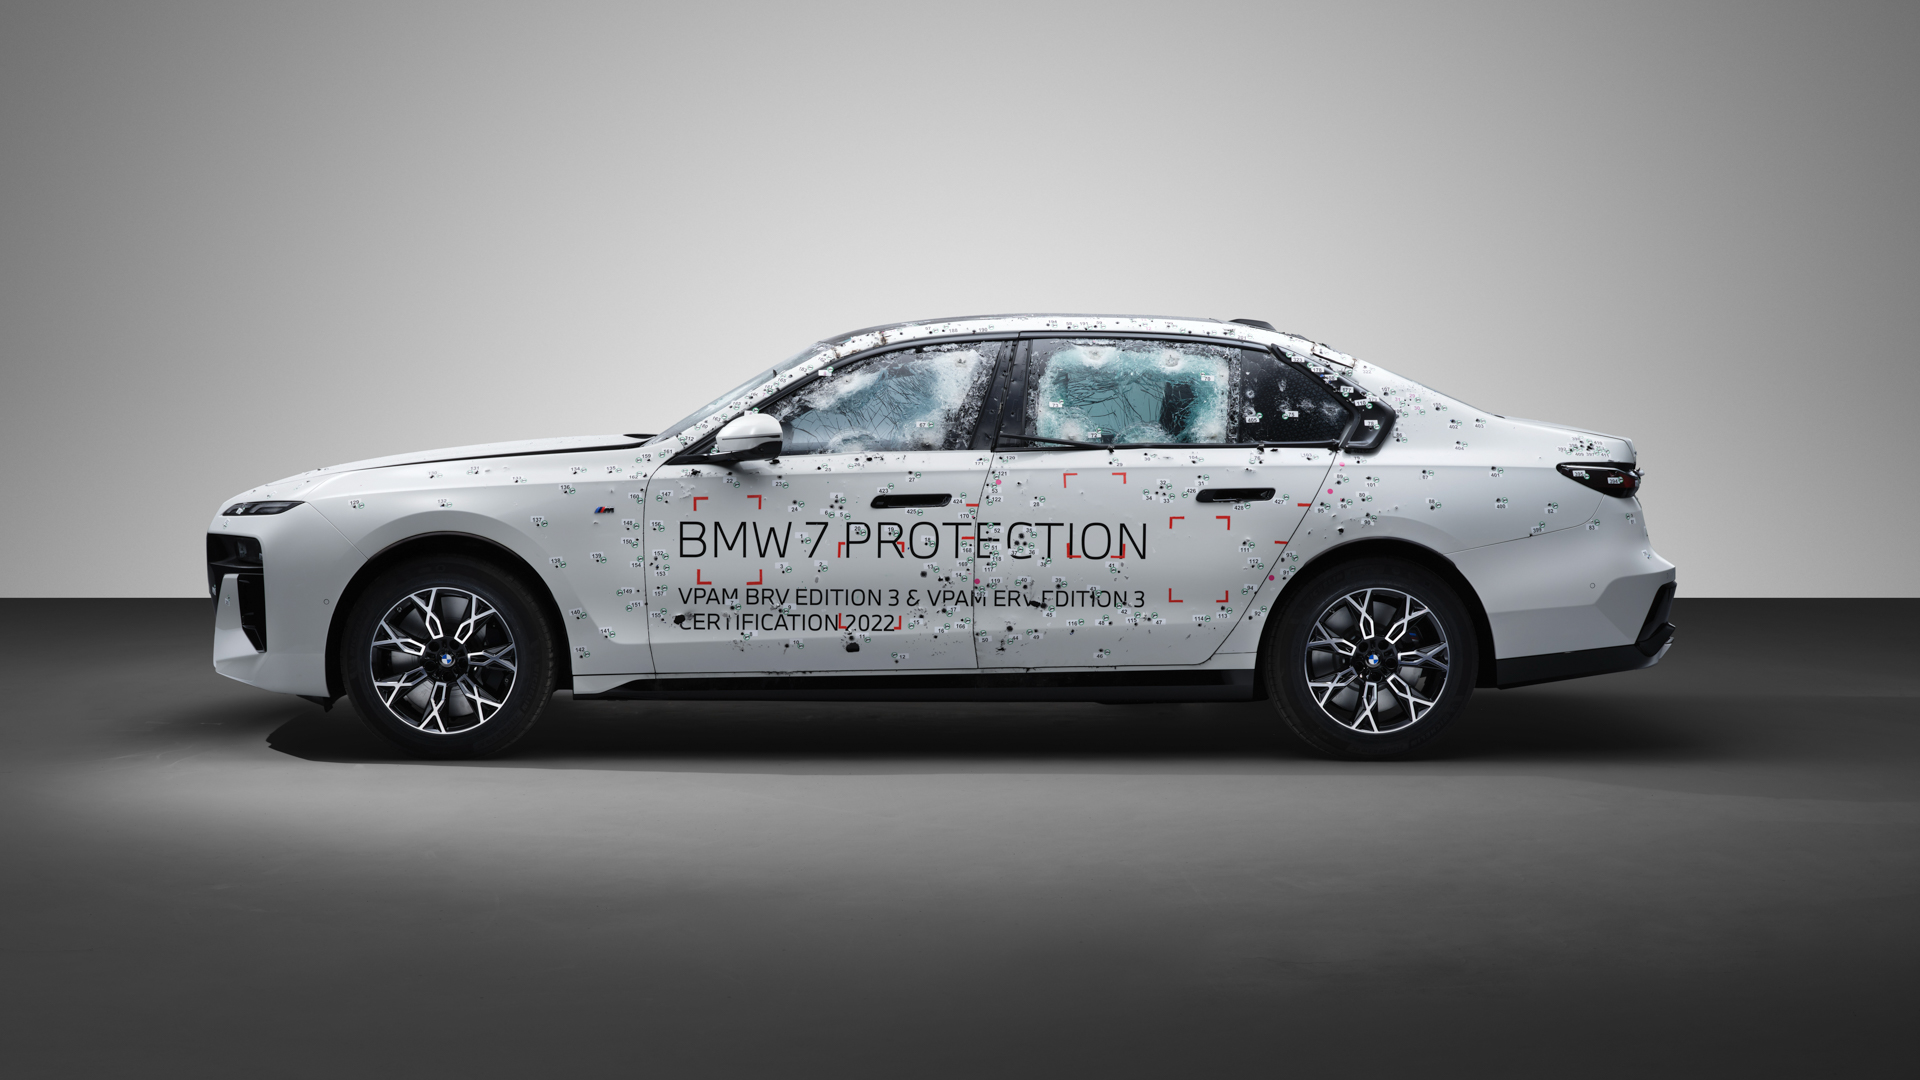 BMW i7 Protection: Finally An EV For People Who Might Get Shot At